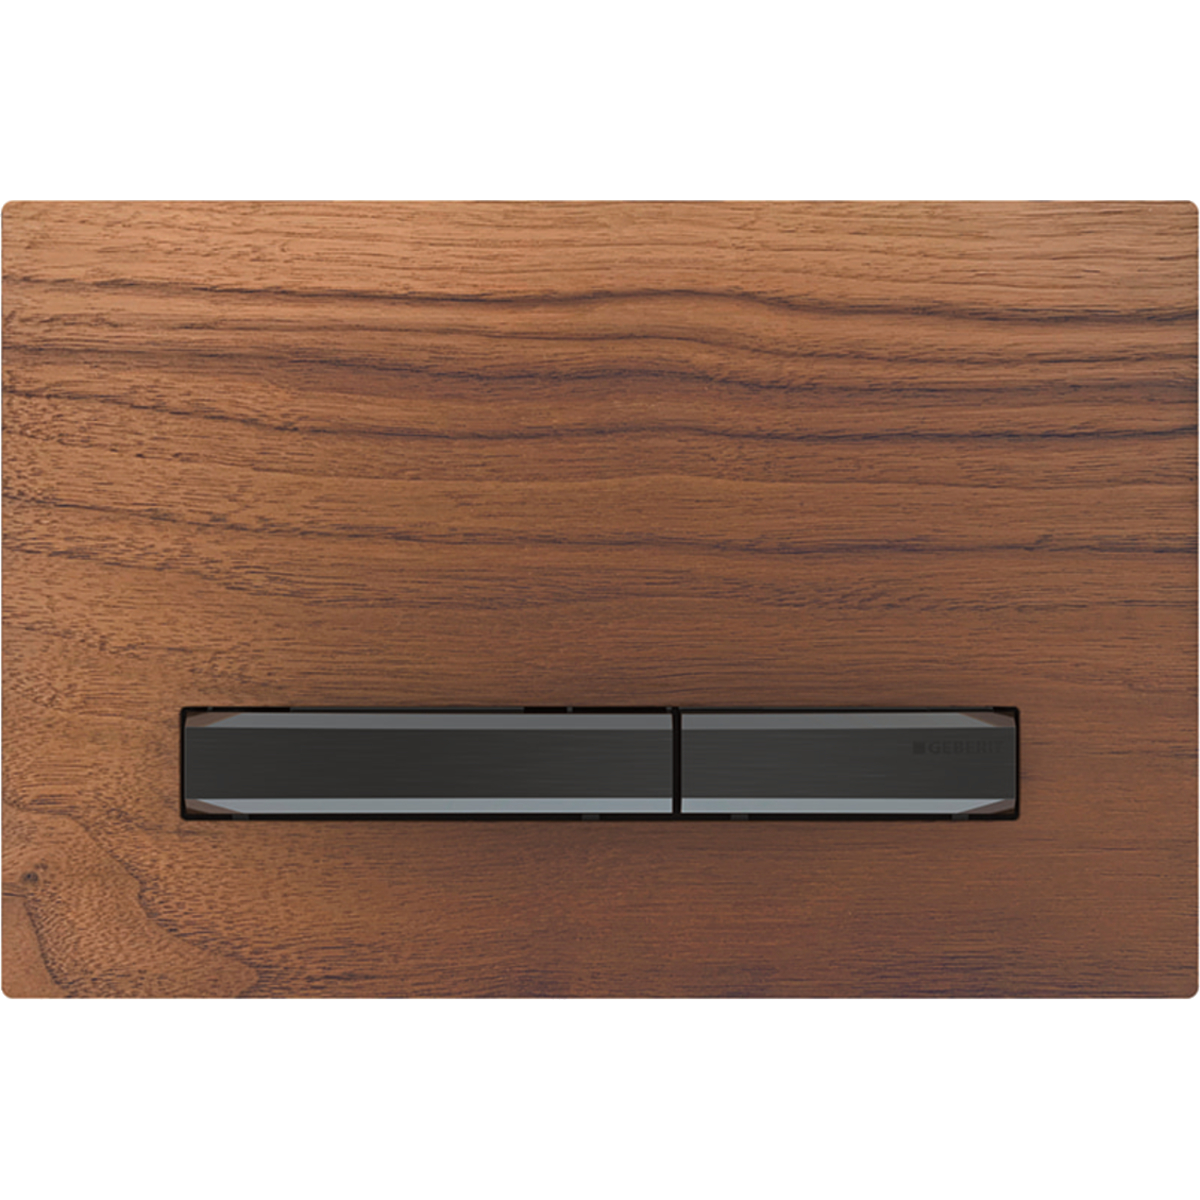 Geberit 115.671.JX.2 Actuator Plate Sigma50 for Dual Flush, Metal Colour Black Chrome - Base Plate and Buttons: Black Chrome/Cover Plate: Black Walnut